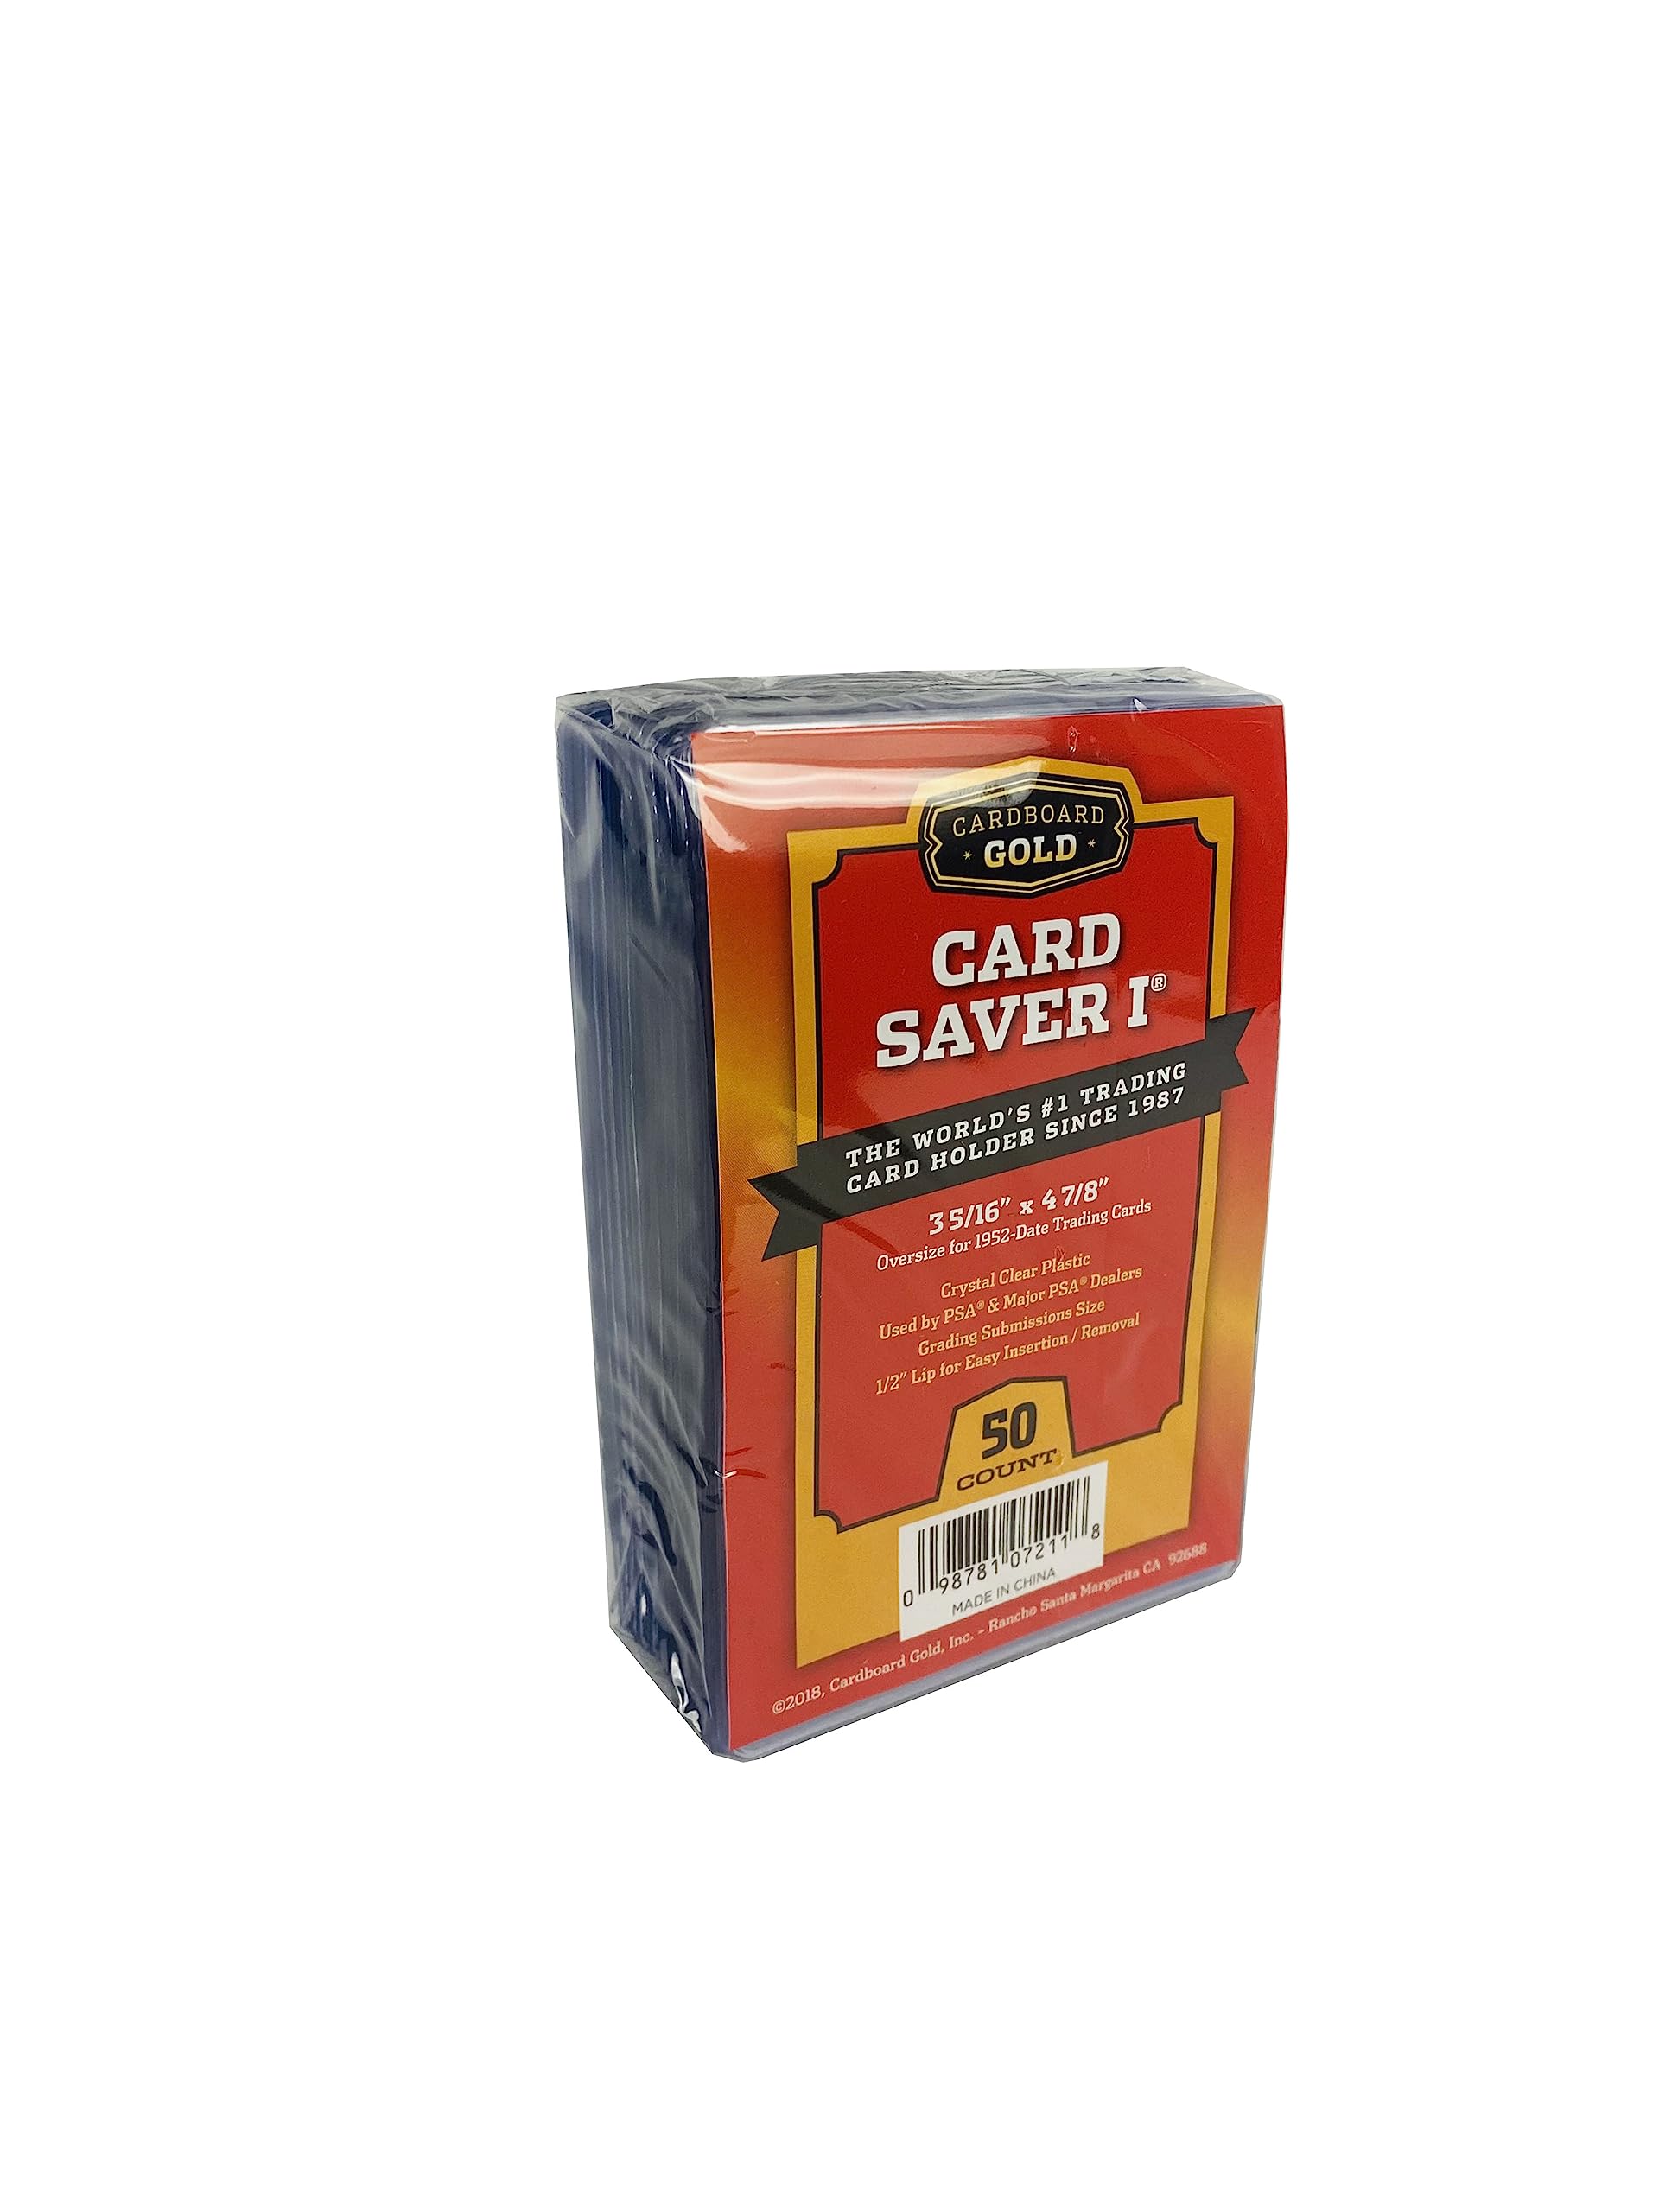 Cardboard Gold Card Saver 1 - 50ct Semi-Rigid Card Holders  - PSA Submission Size